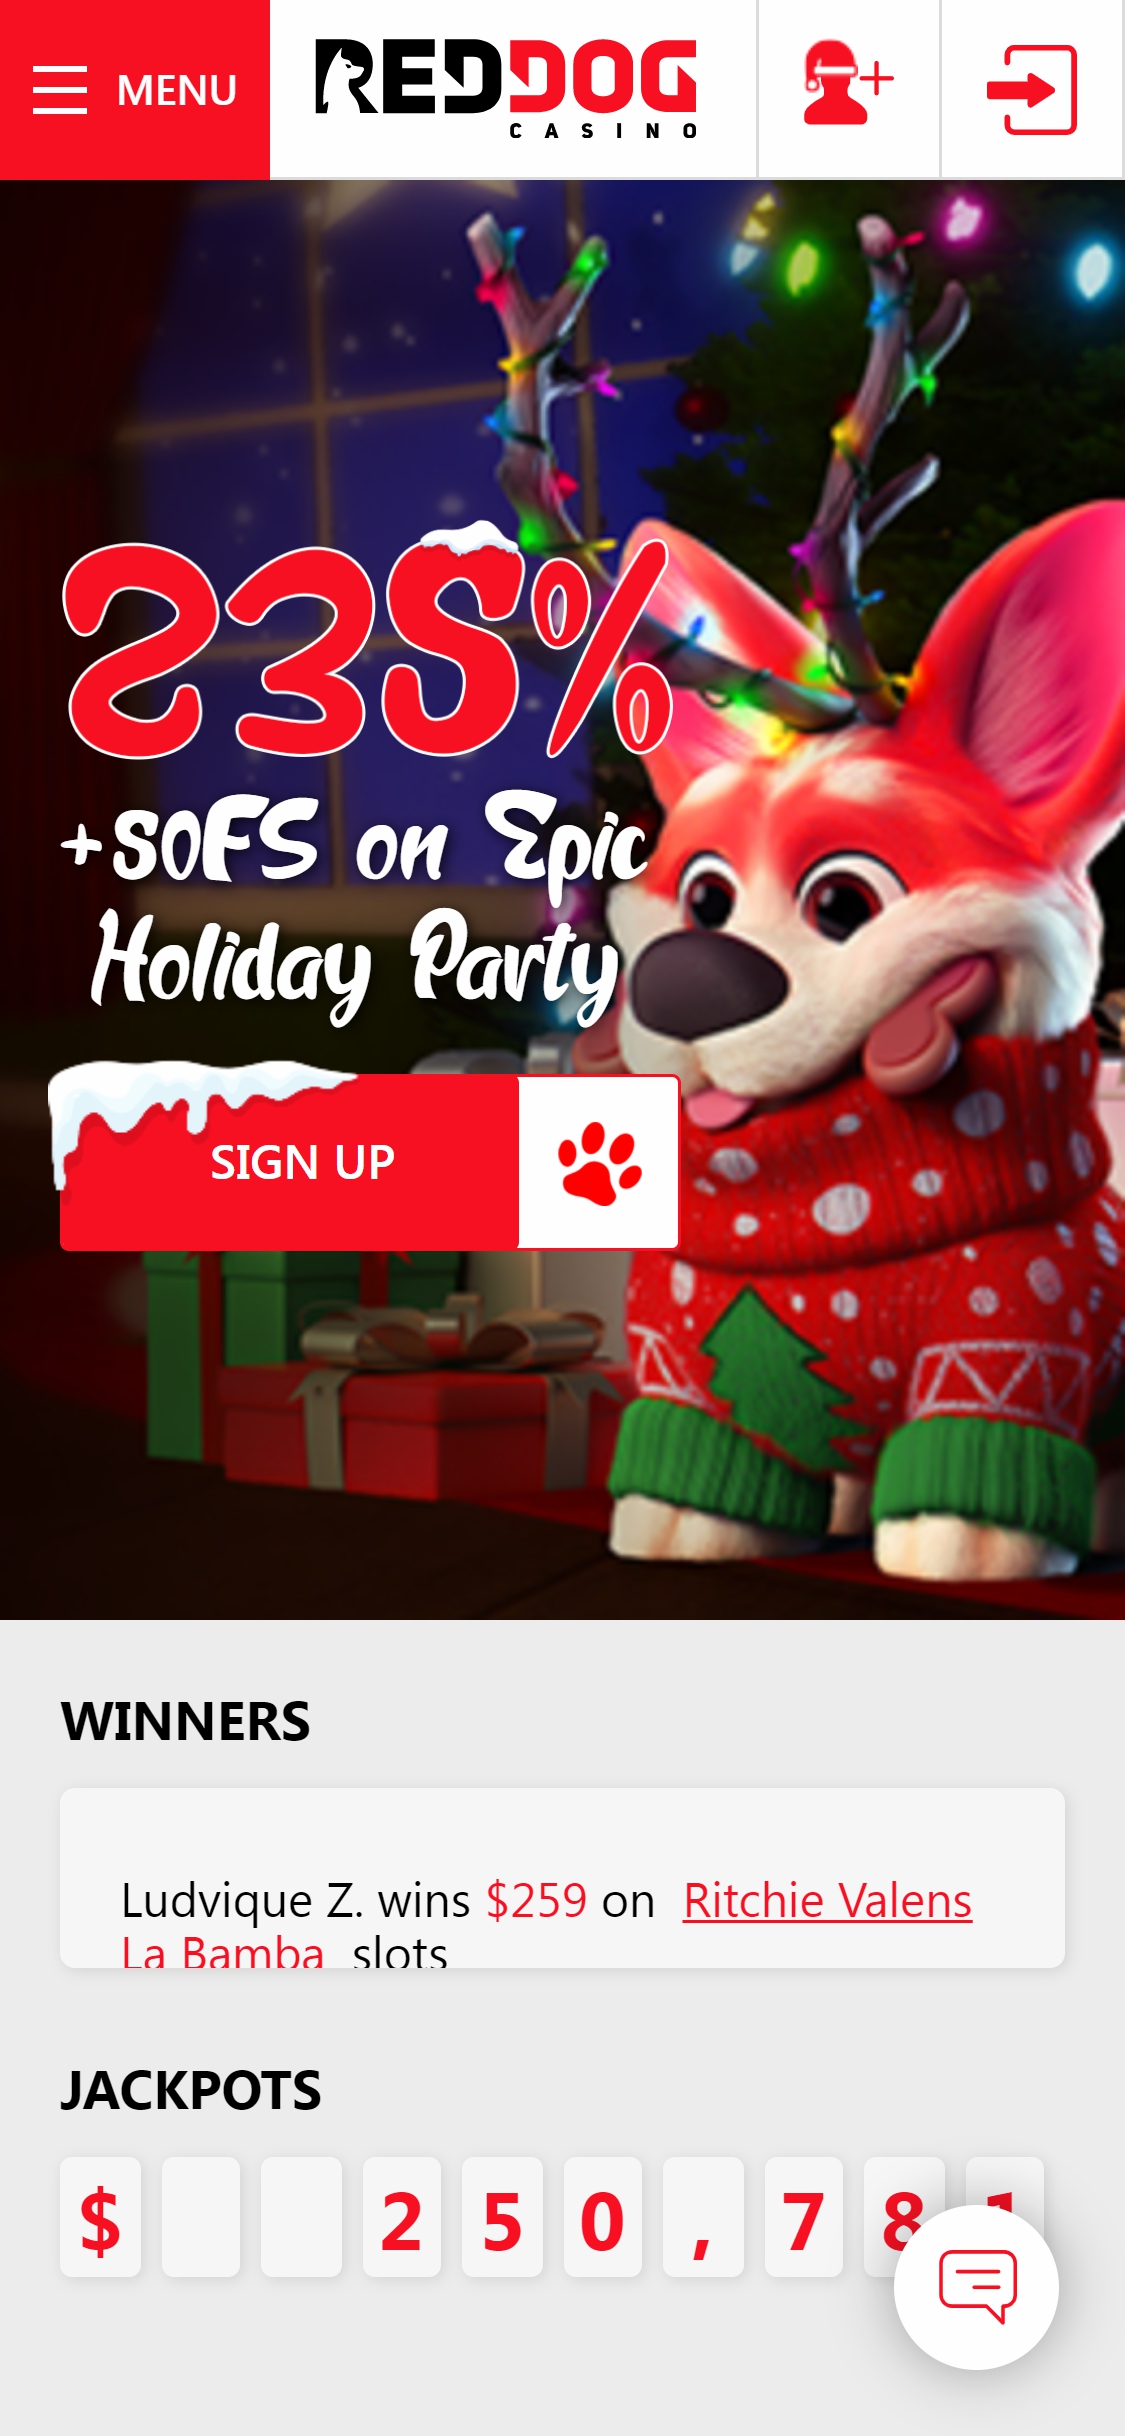 Red Dog Casino Mobile Review